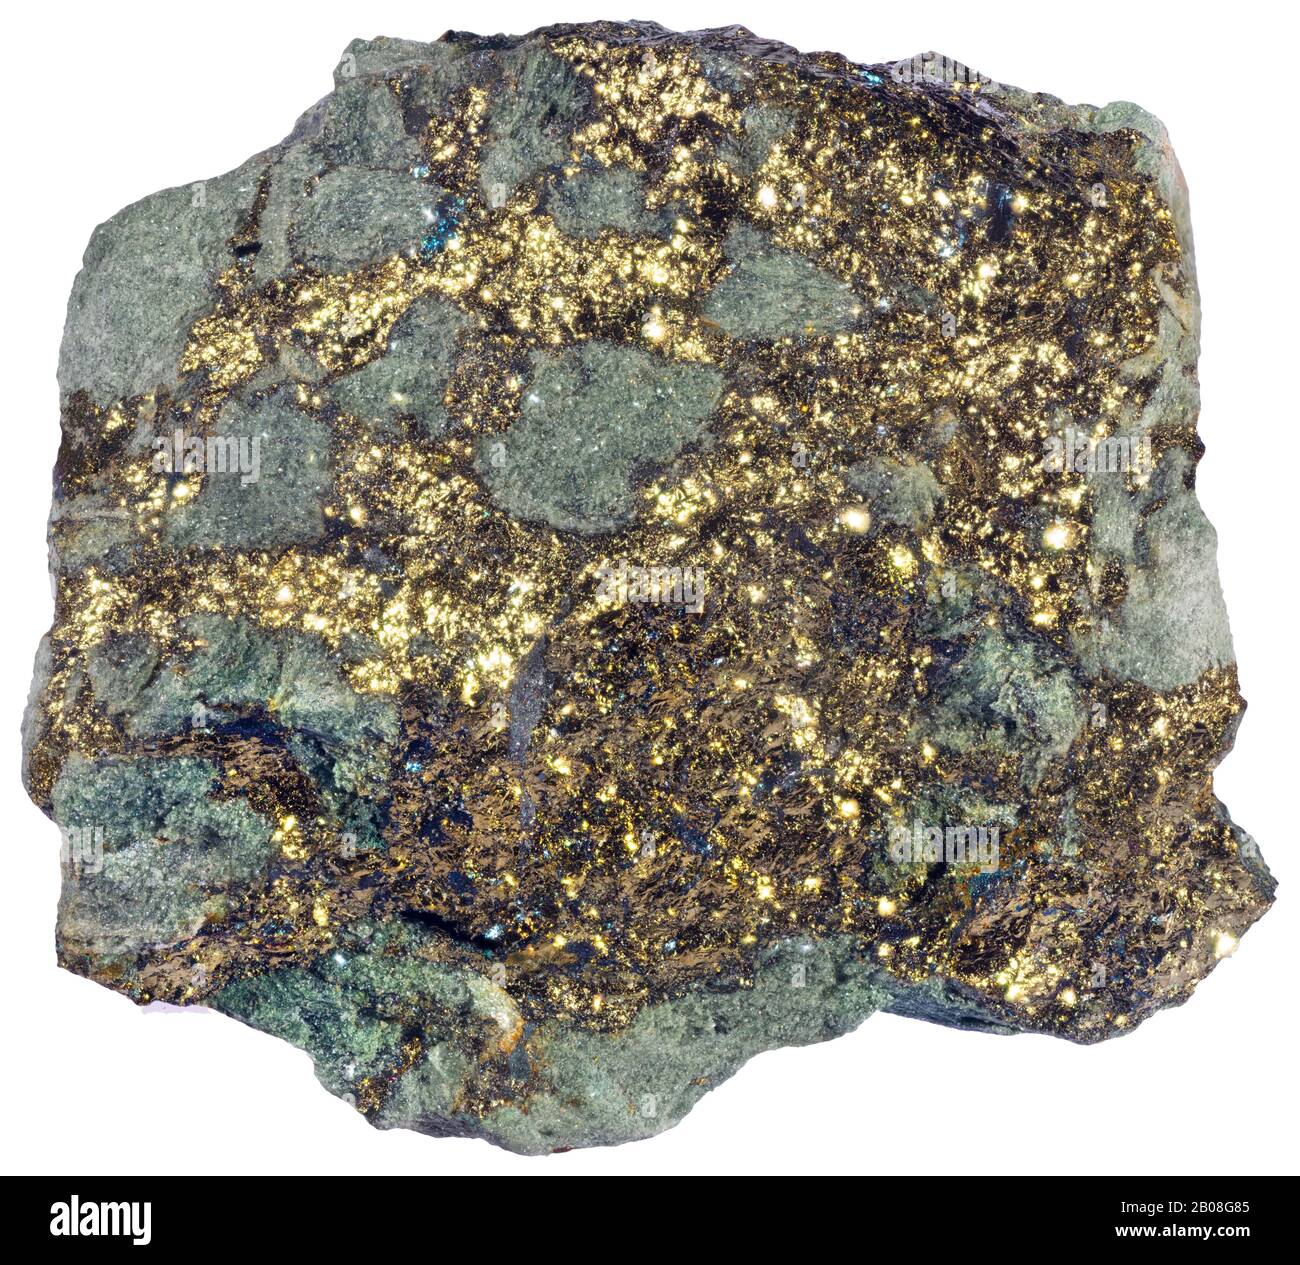 Native Gold, Temiskaming, Ontario Native gold occurs as very small to microscopic particles embedded in rock, often together with silver, quartz or su Stock Photo